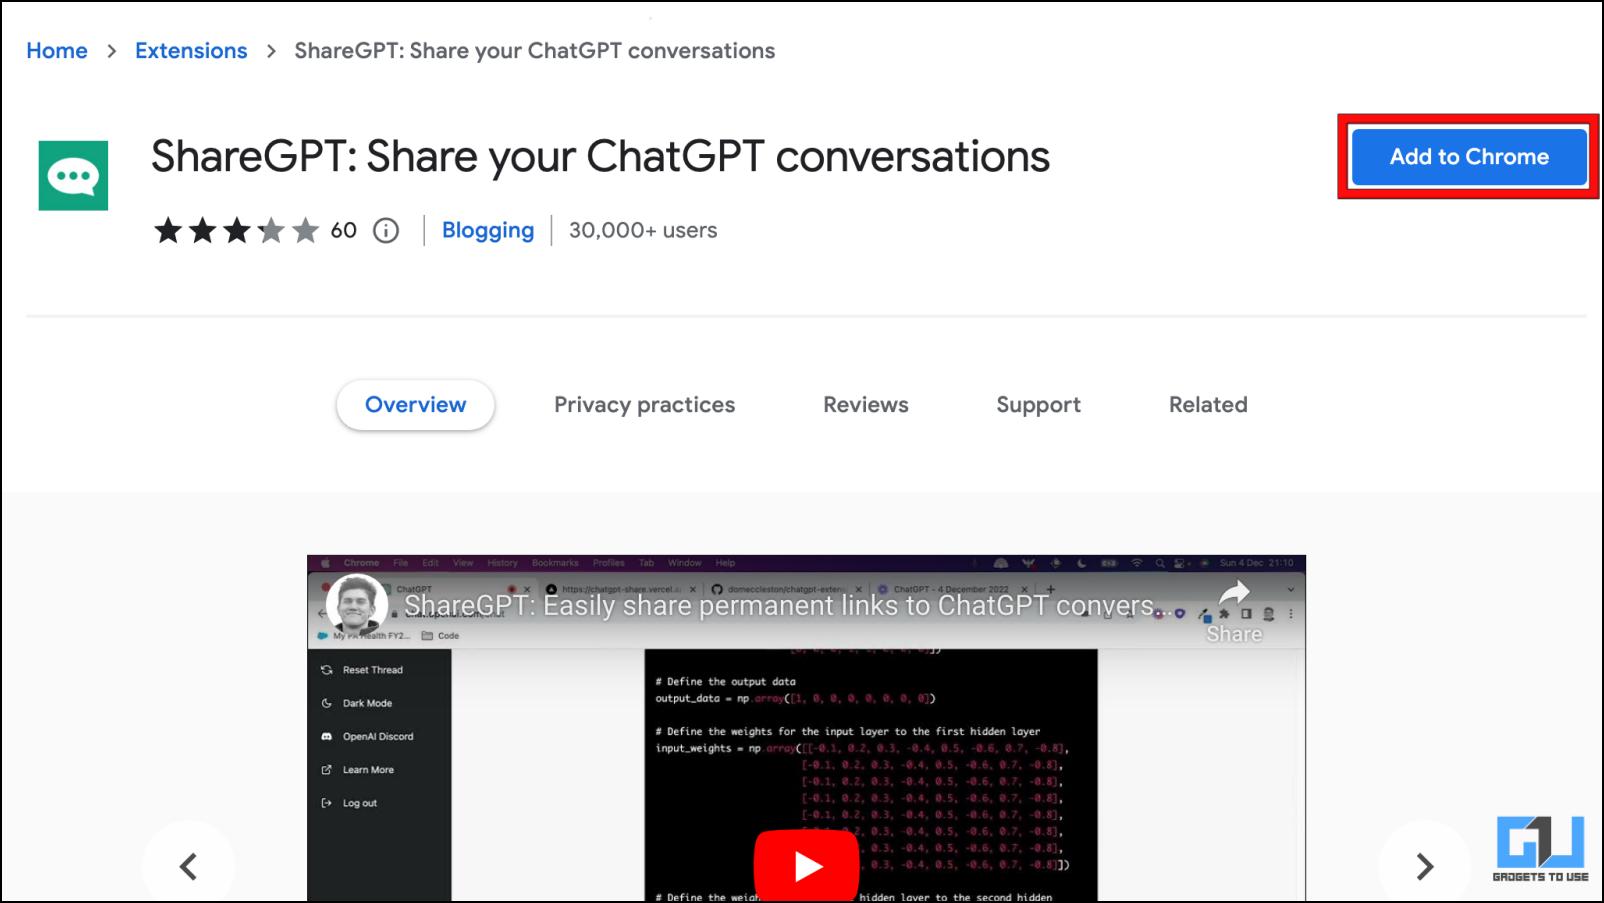 Download, Share or Export ChatGPT Conversations